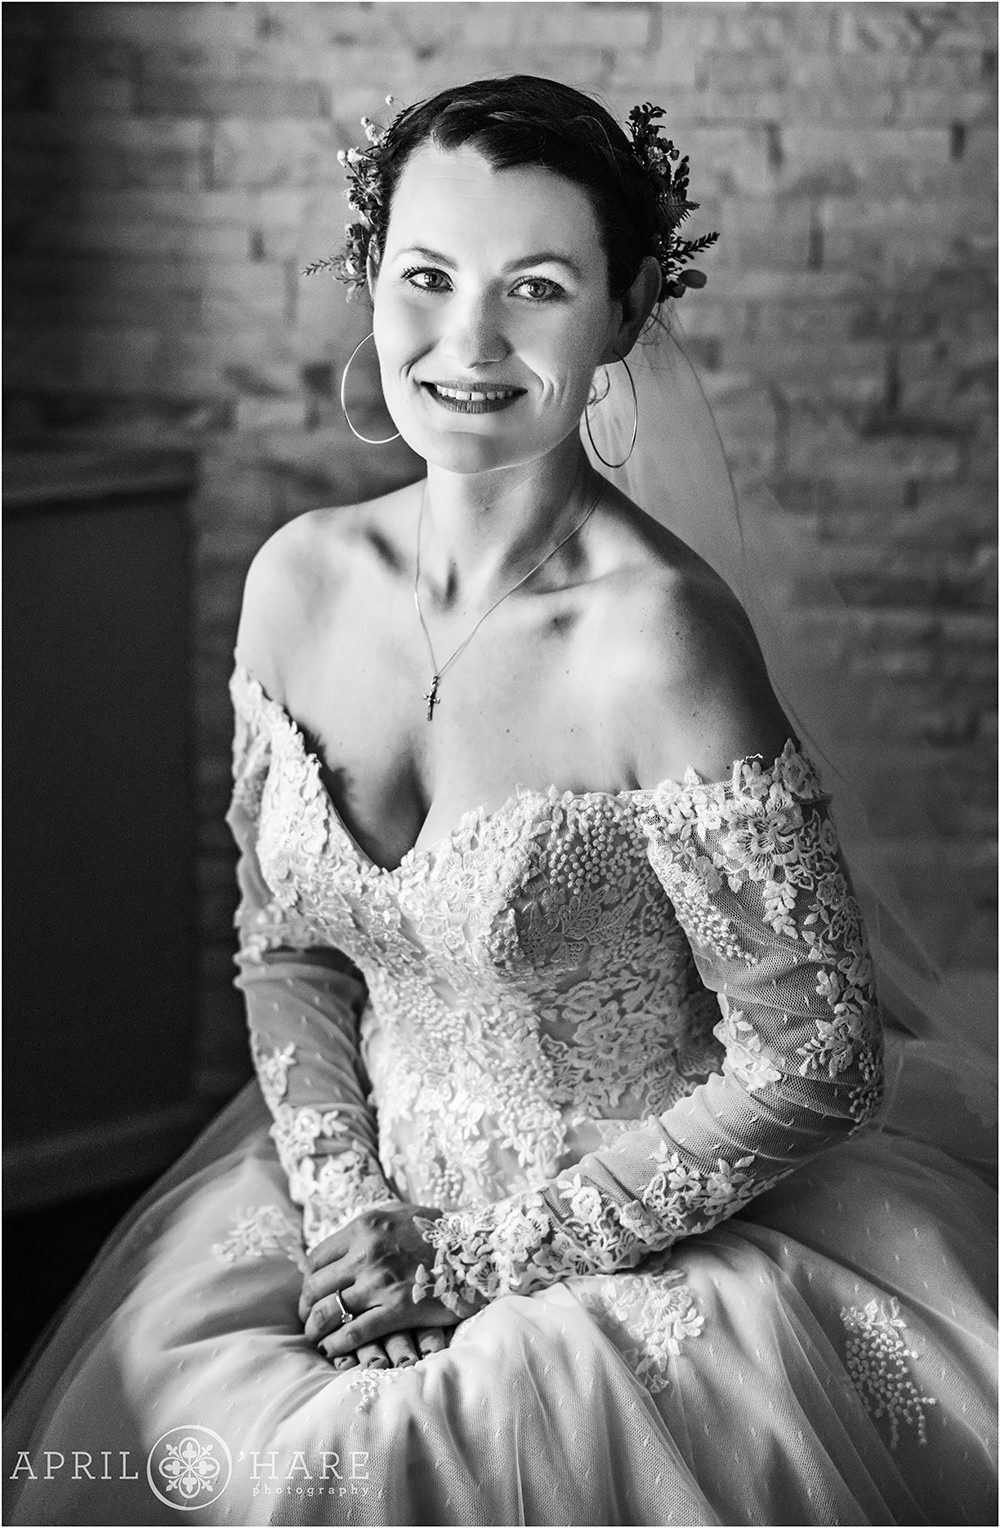 B&W Portrait of a Bride with Window Light in her Room on her wedding day